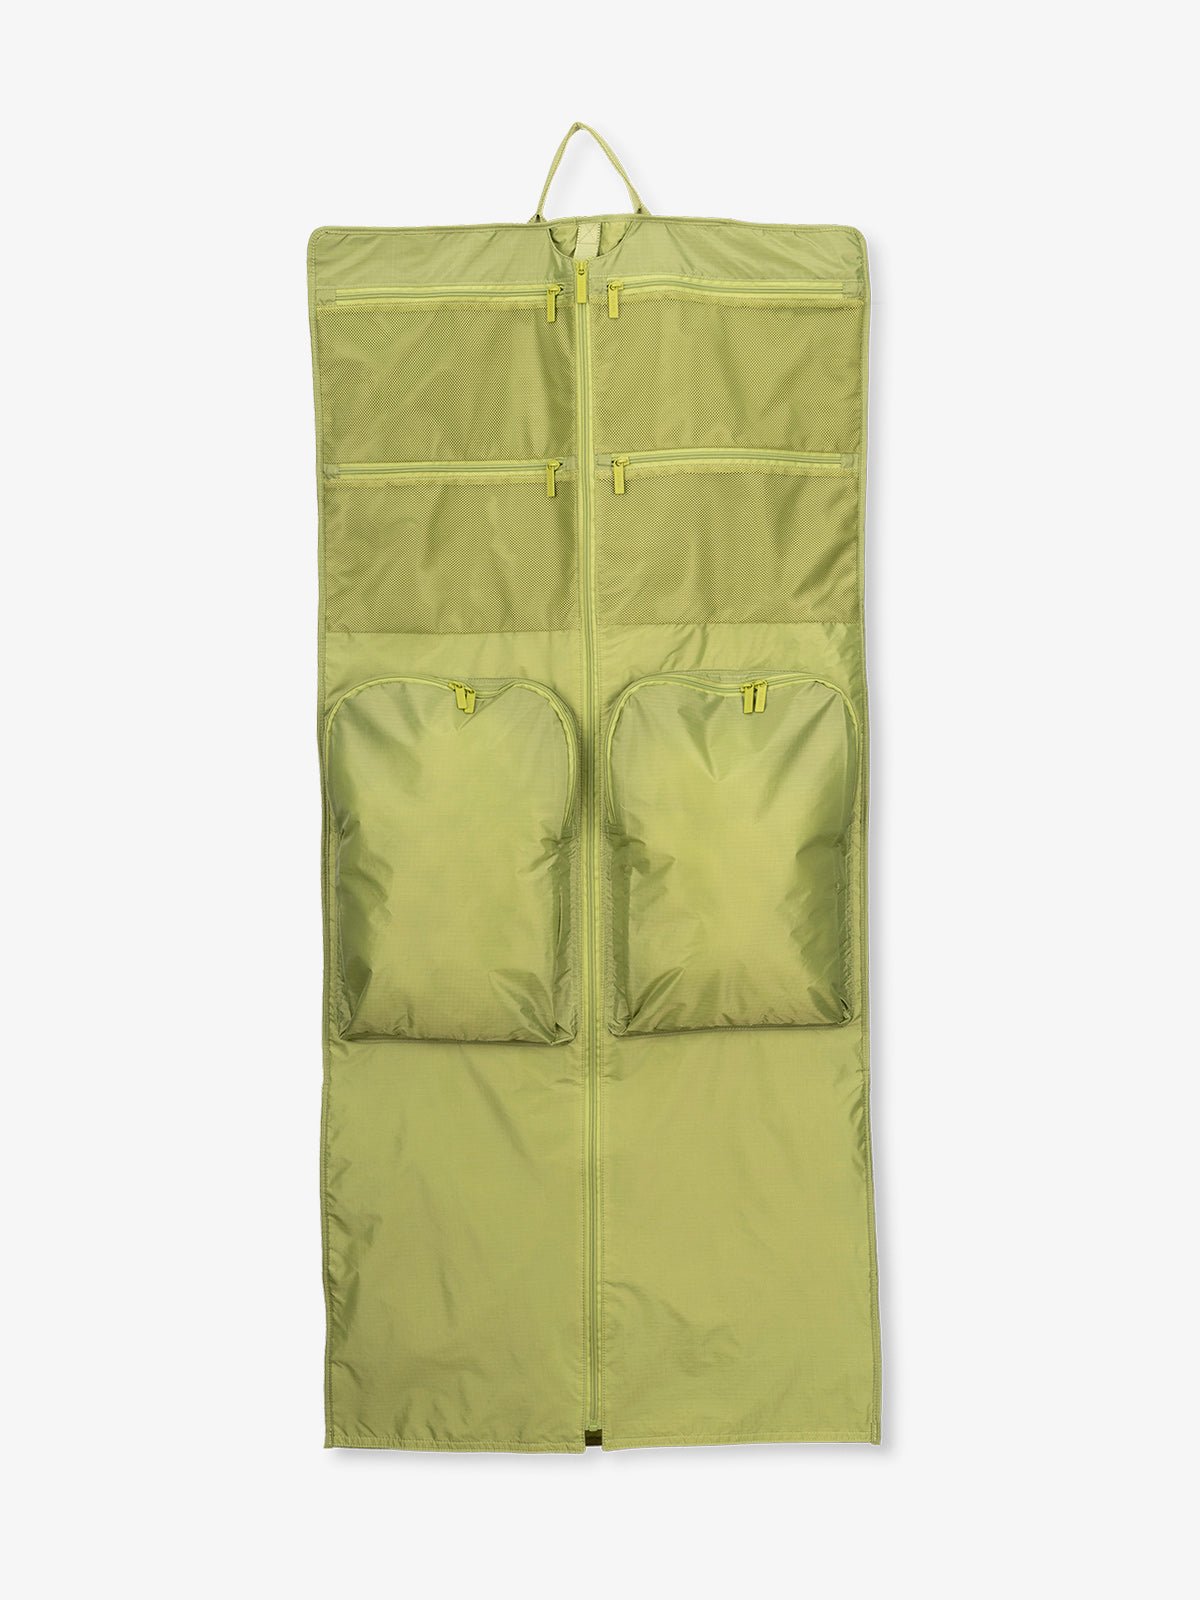 CALPAK Compakt large travel garment bag with water resistant ripstop nylon fabric and multiple pockets in green